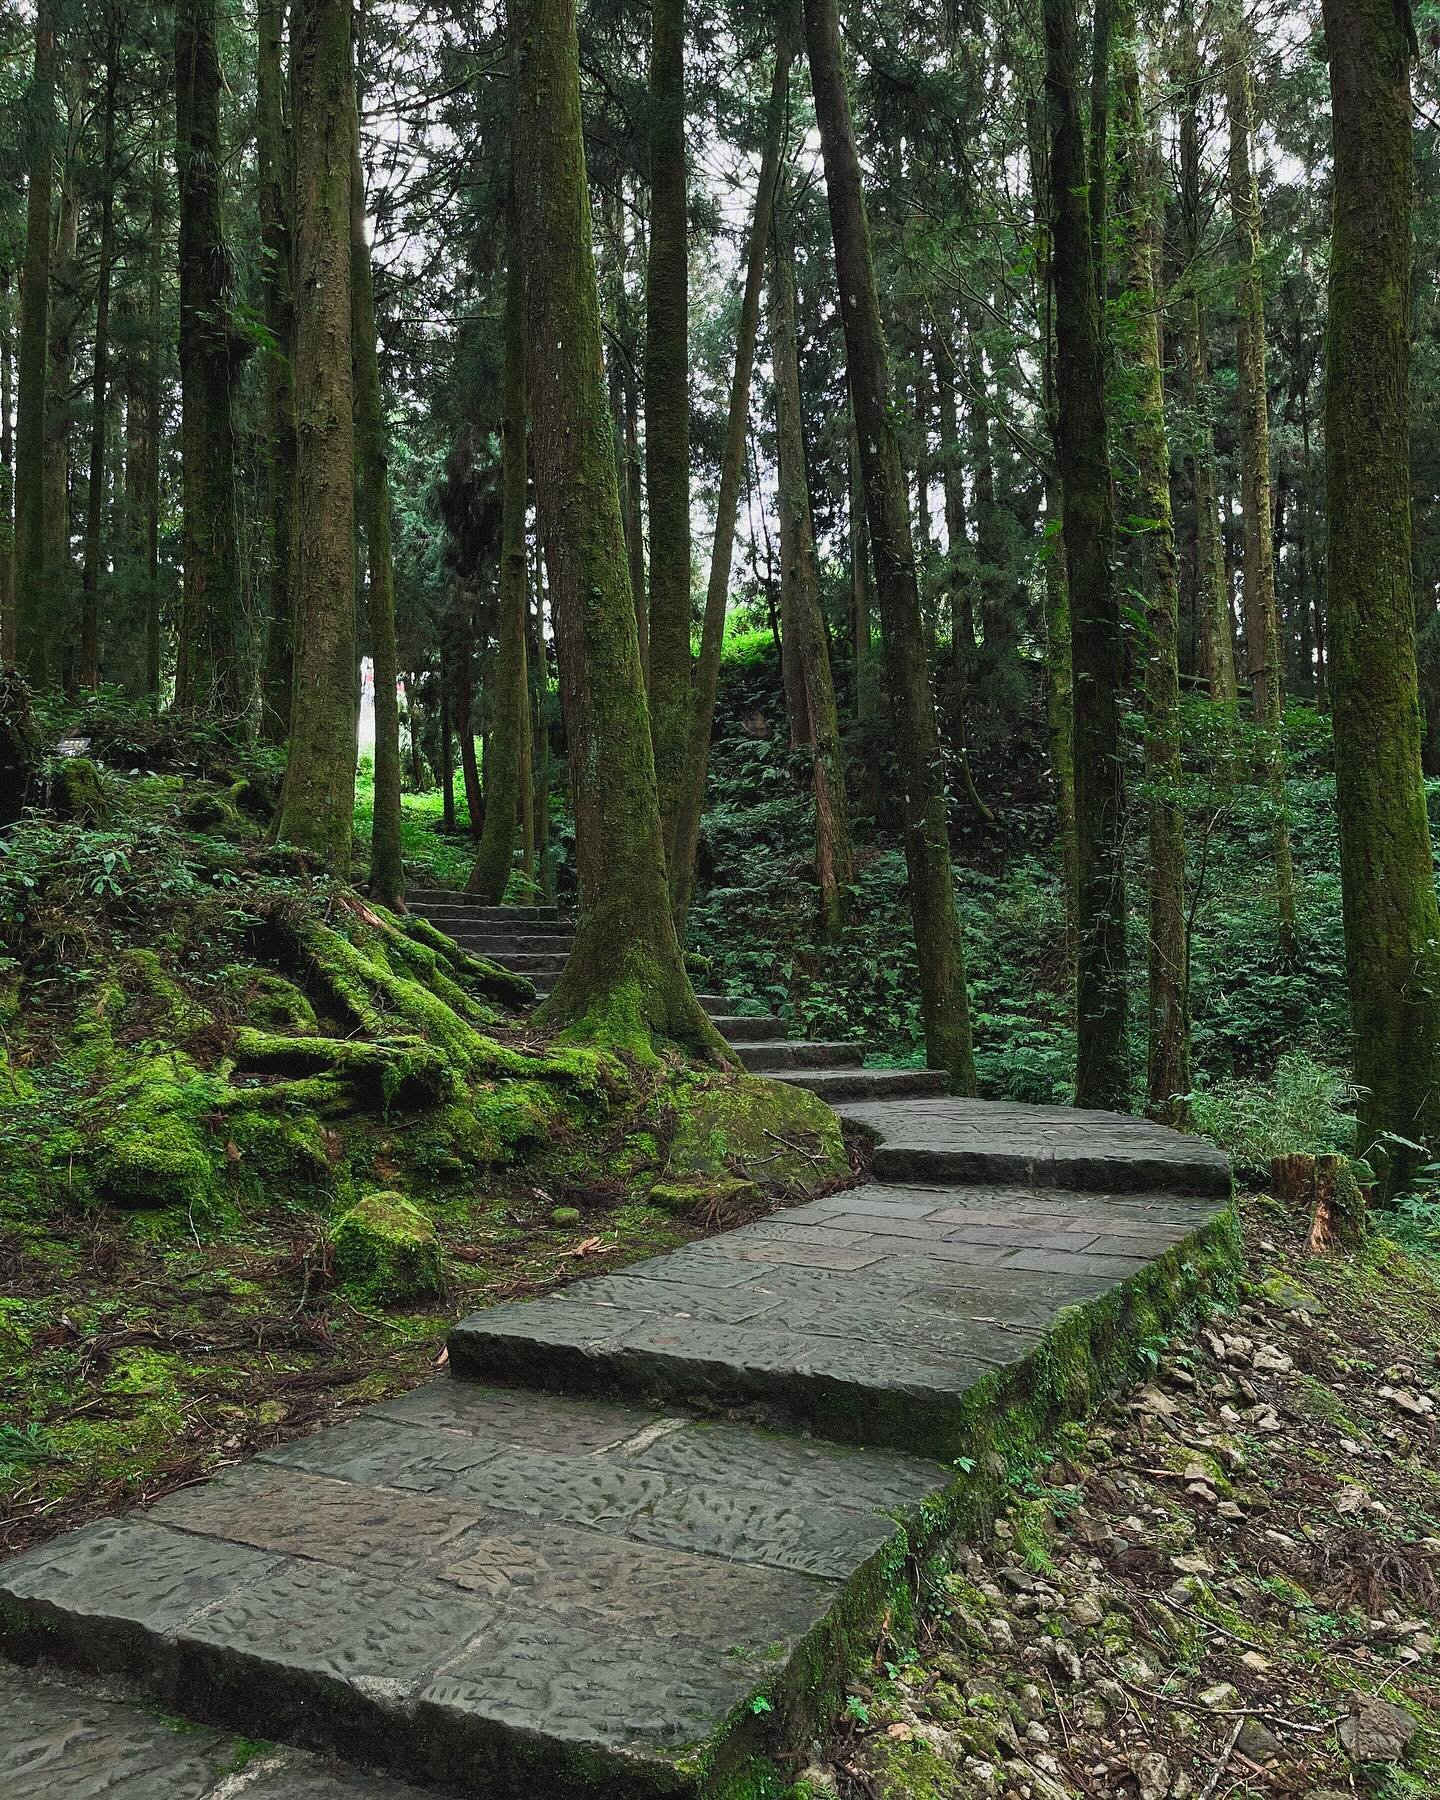 where will this mossy path lead you? #alishanforest #taiwan #intothewoods